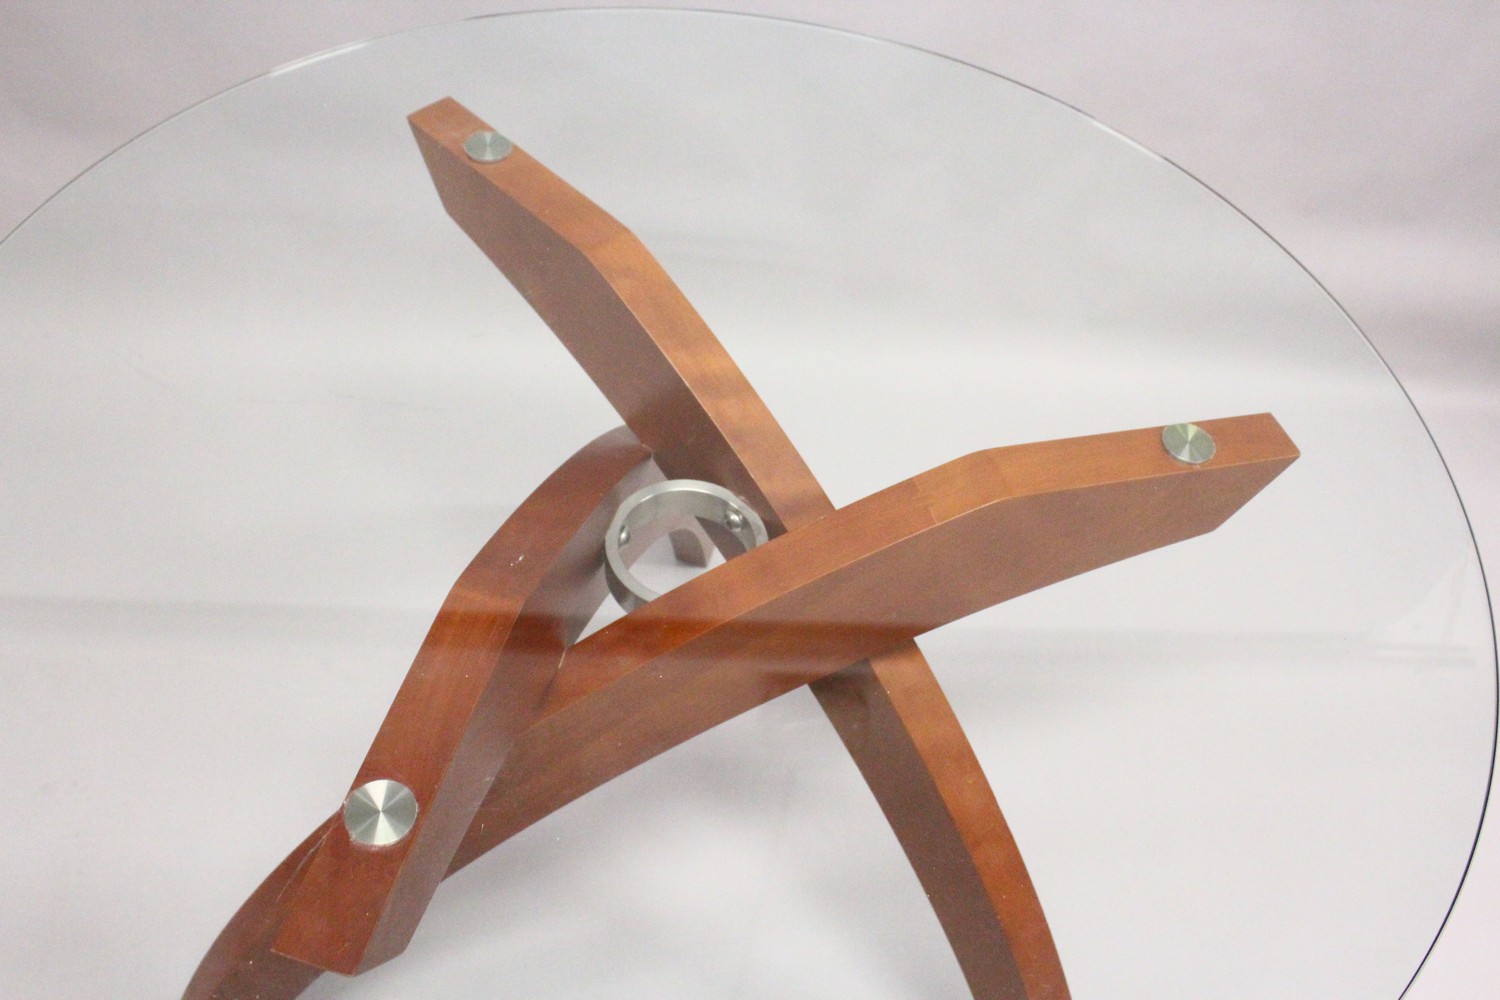 TABLEMAKERS of WIMBLEDON, LONDON, A BALLERINA TABLE, with three curving cherry wood legs, united - Image 3 of 7